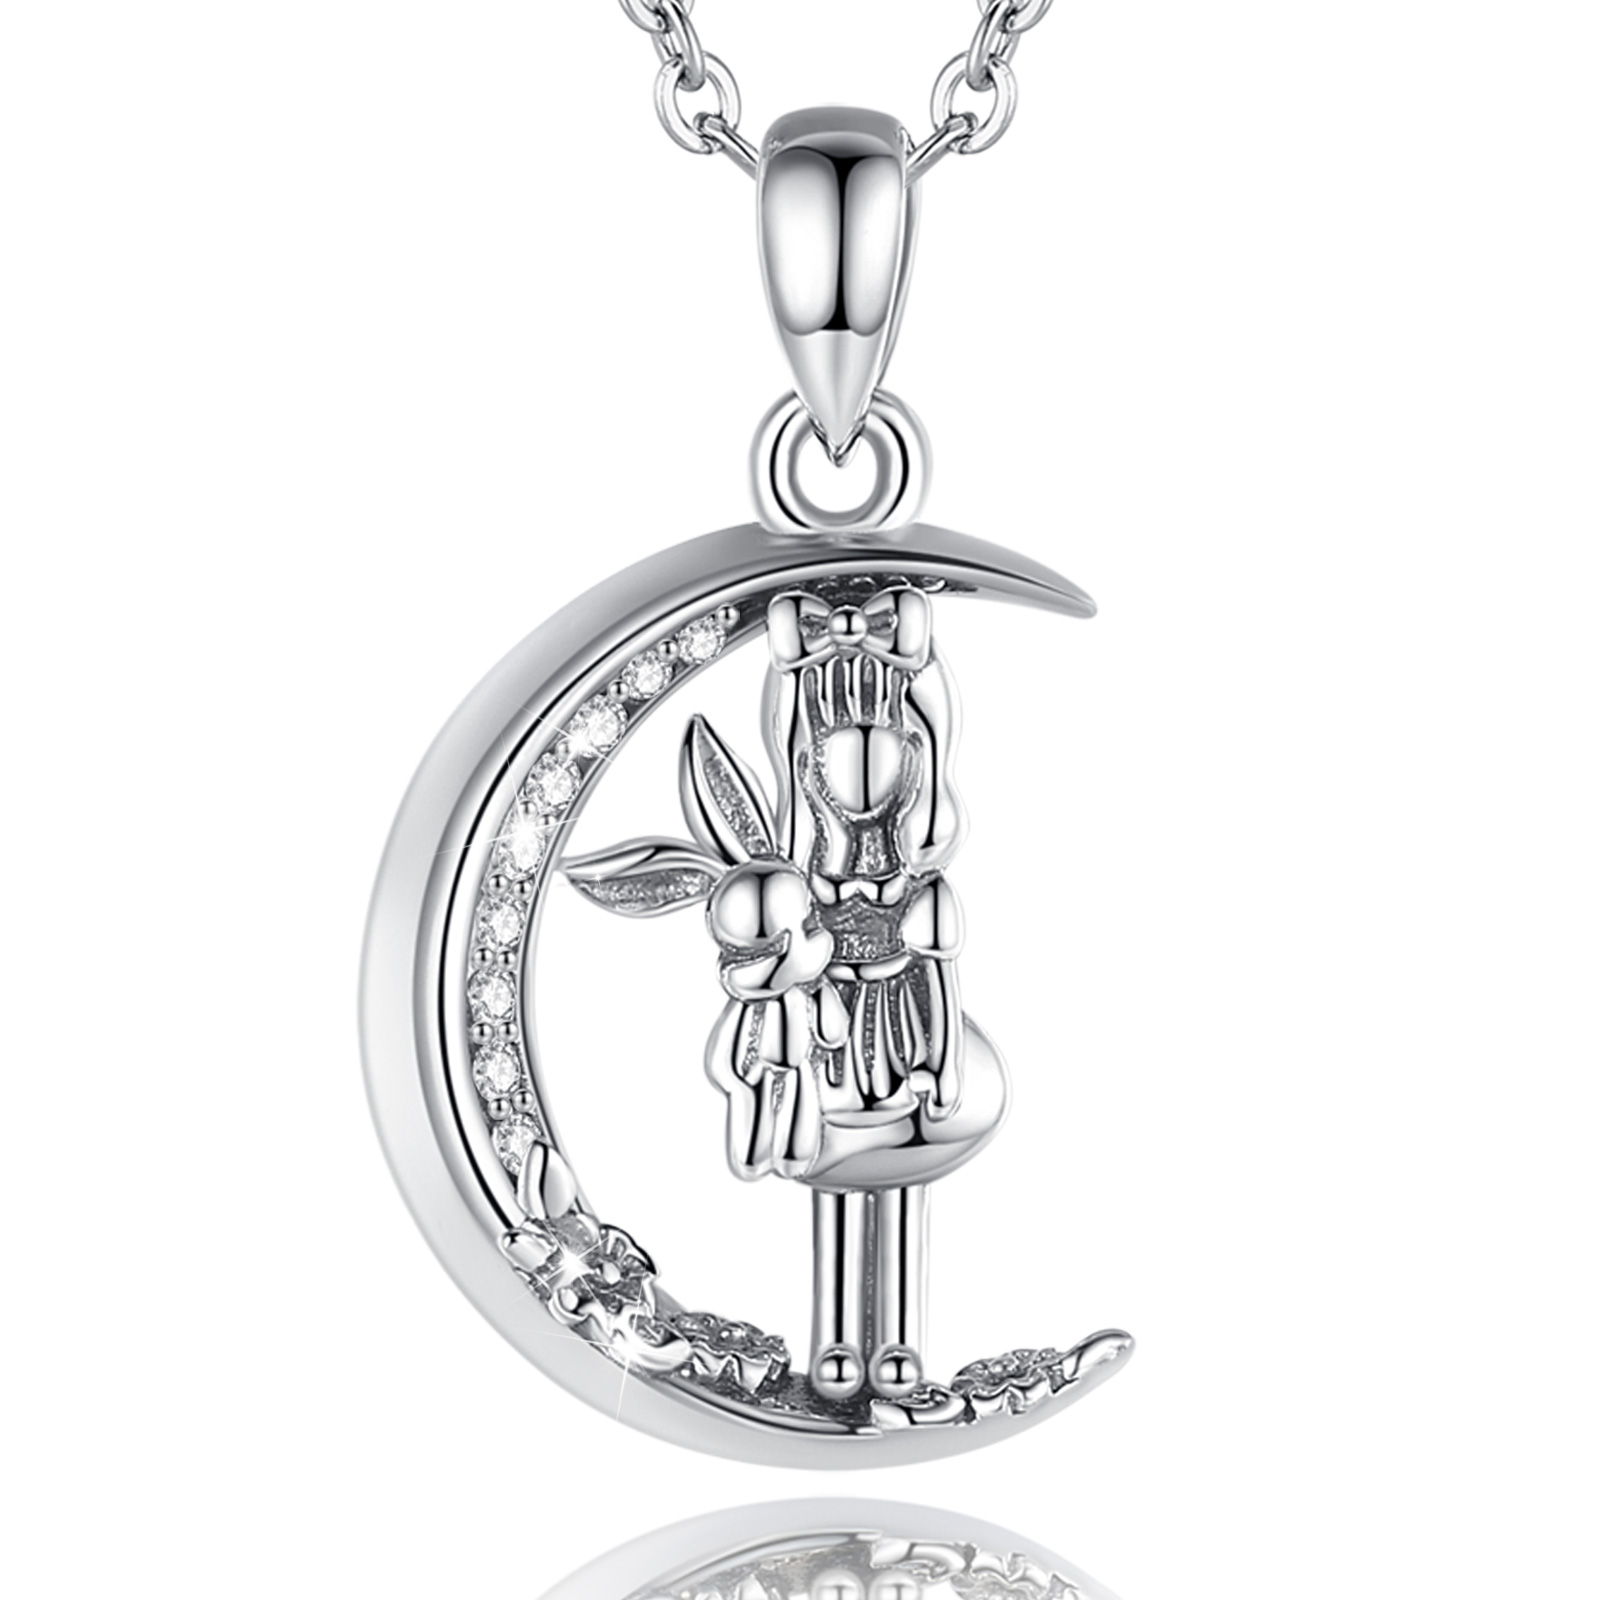 Merryshine Jewelry S925 Sterling Silver Little Girl and Rabbit Crescent Moon Charm Necklace